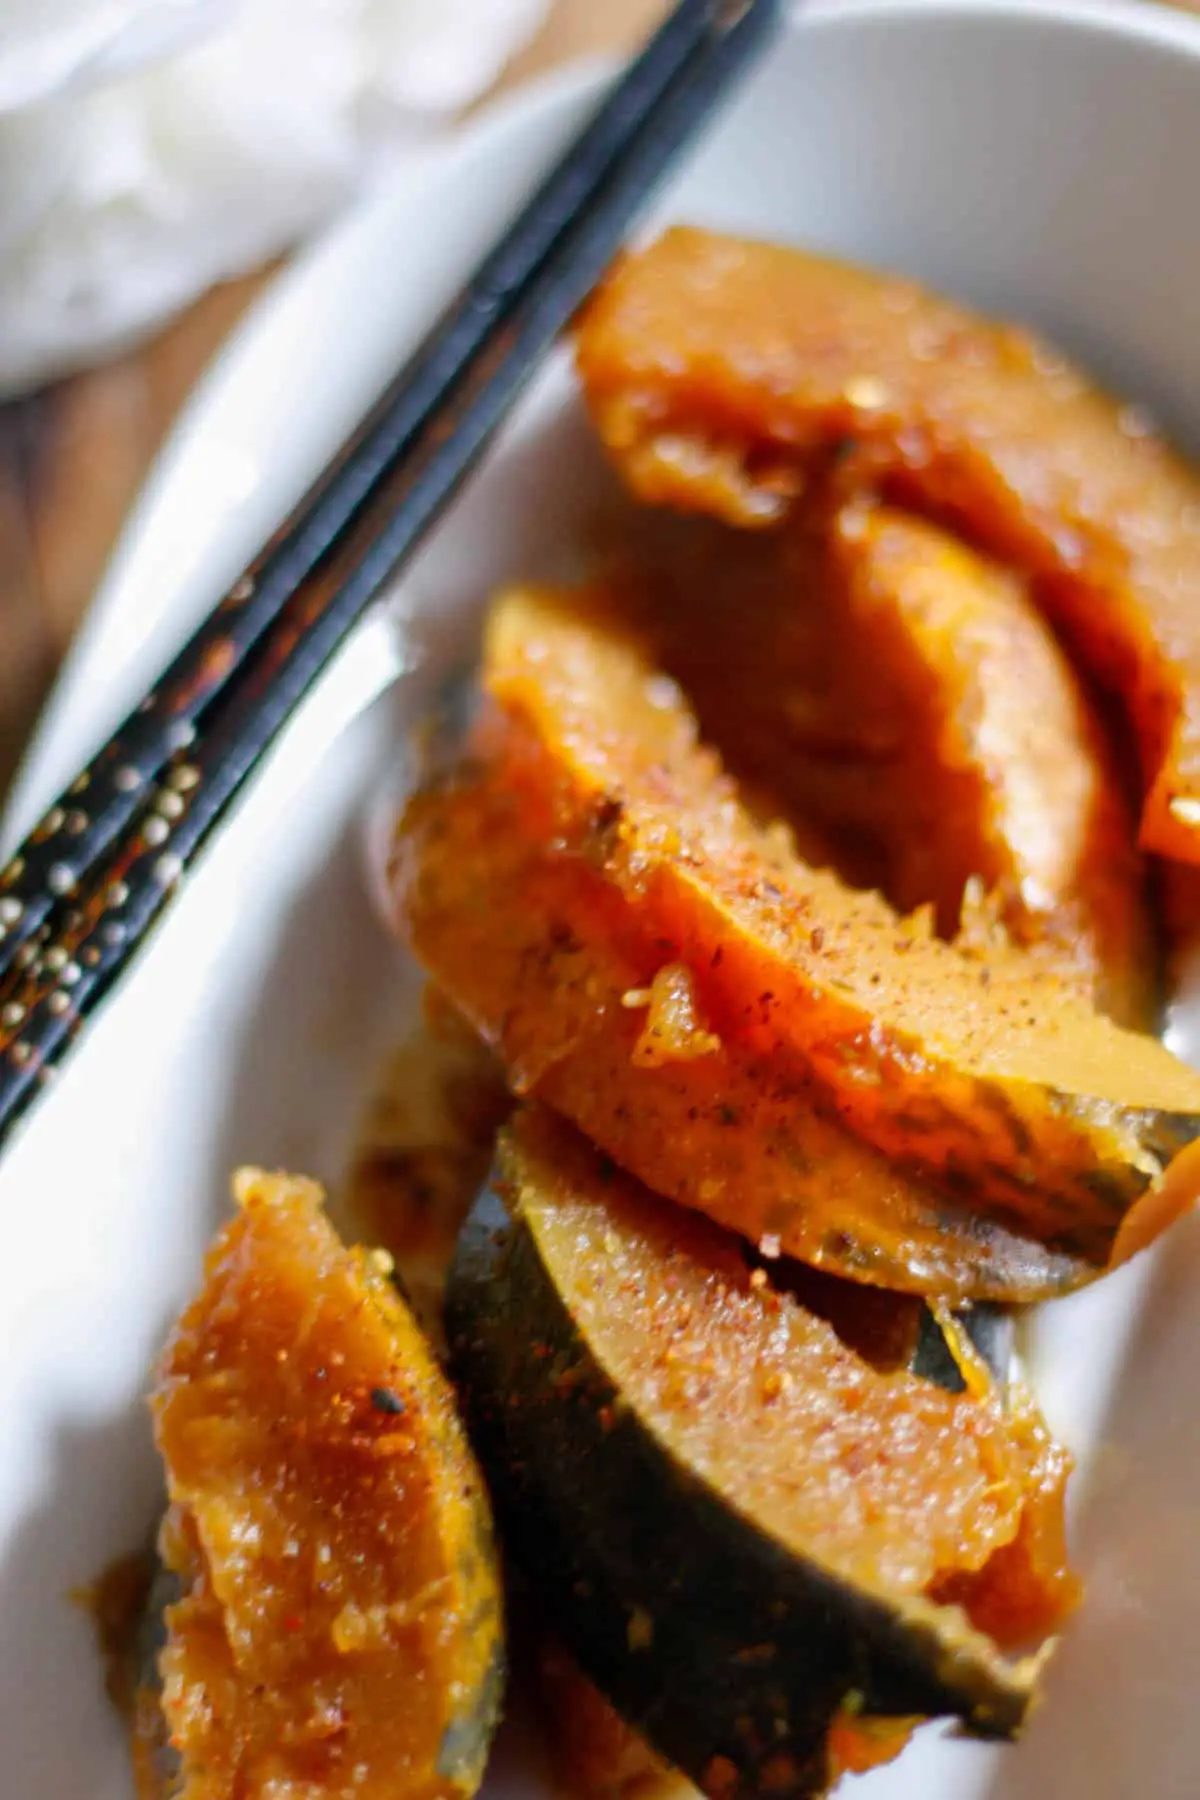 Wedges of cooked acorn squash with sprinkles of Japanese chili pepper on a white dish with chopsticks resting on the side.